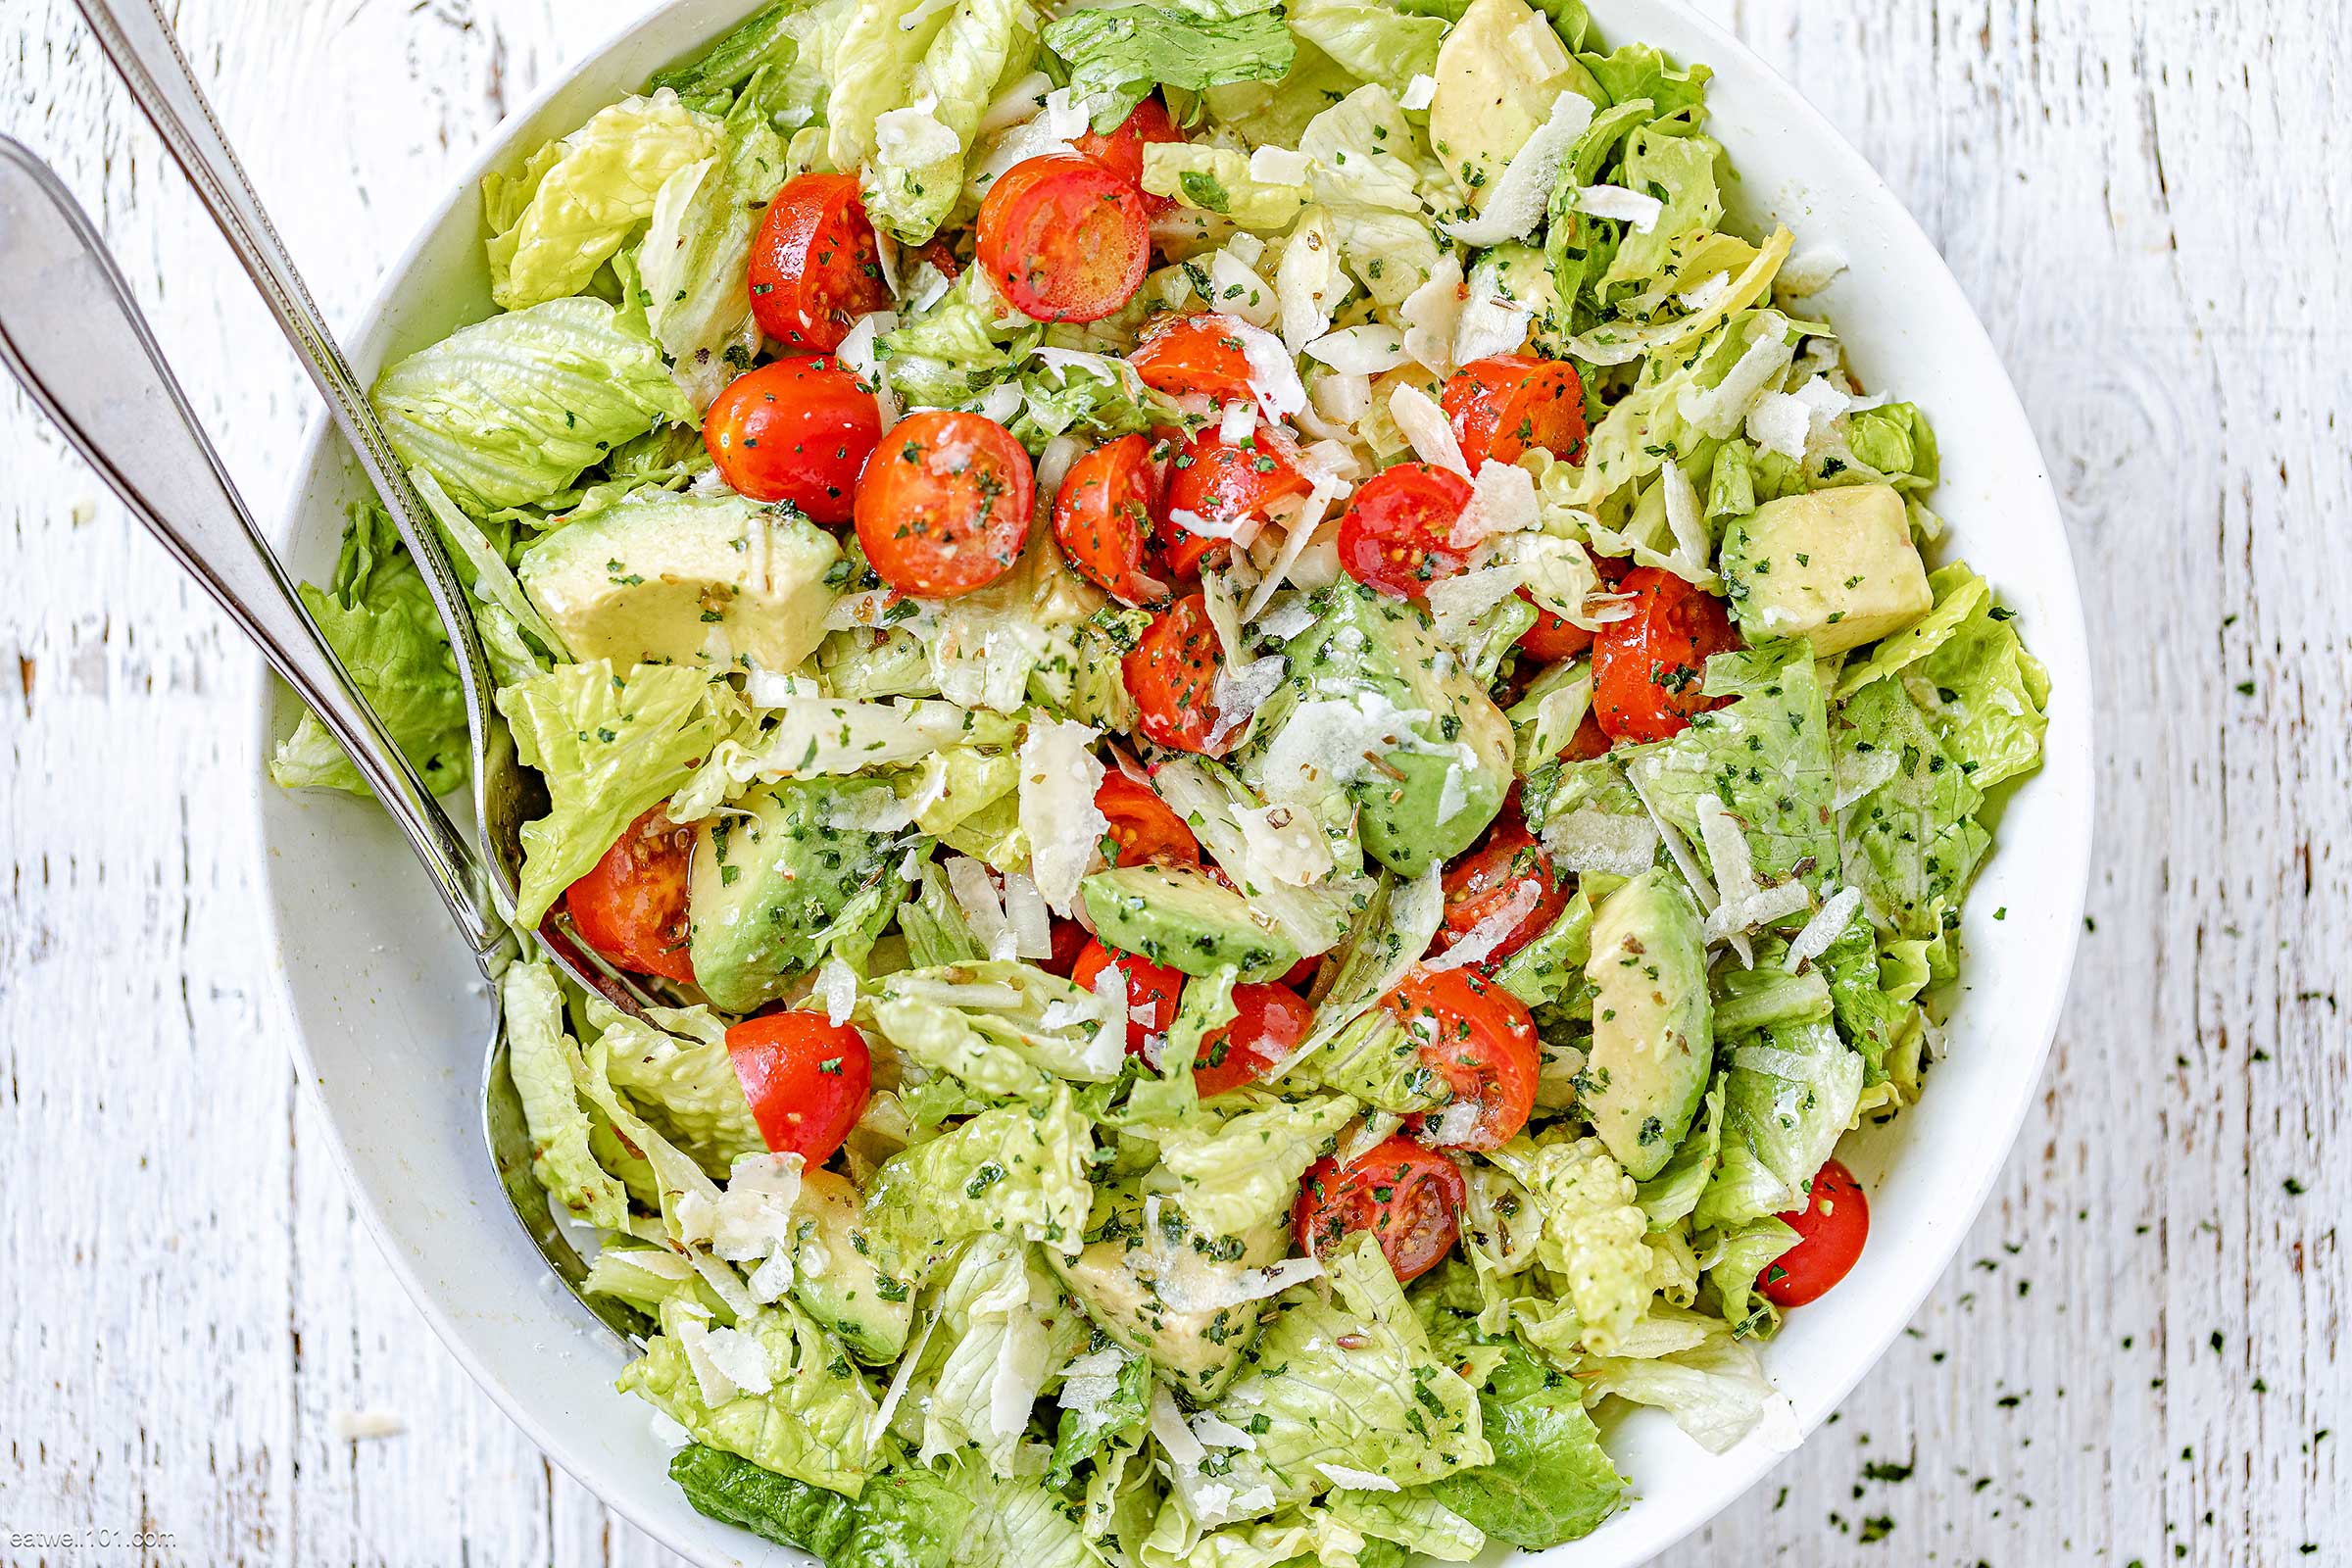 60 Easy Vegetable Salads for Light Lunches & Dinners